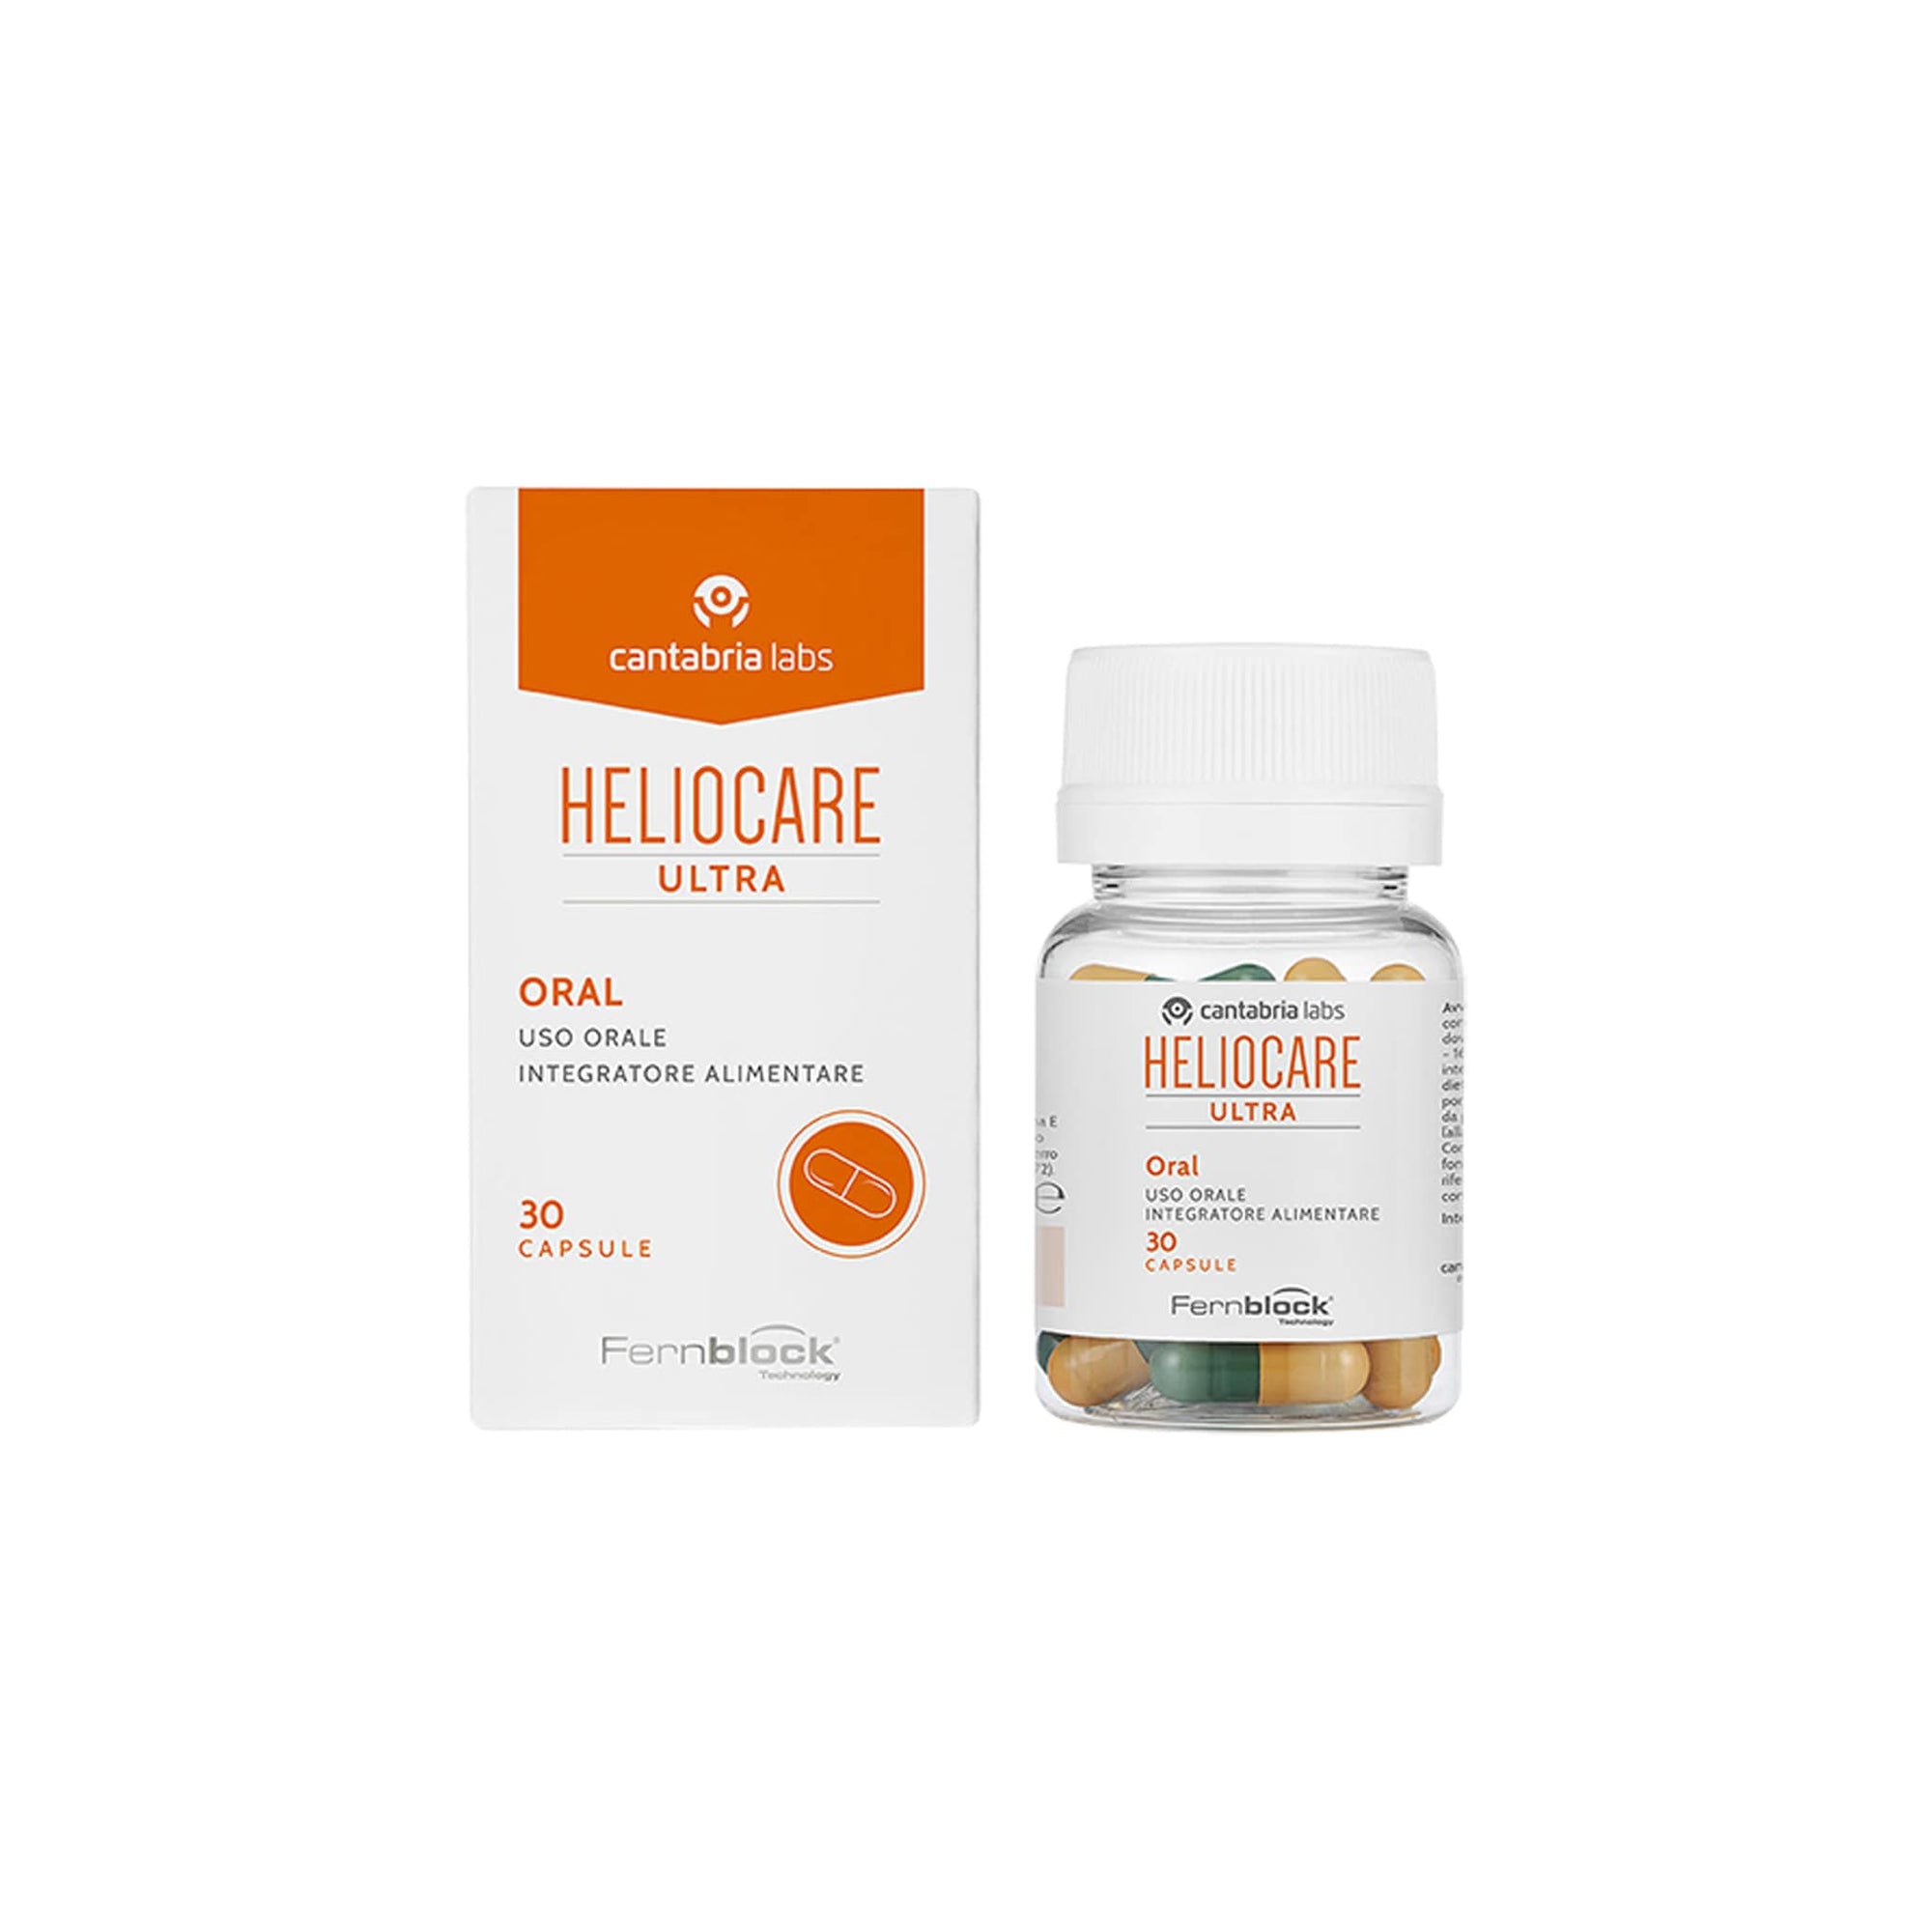 Heliocare Ultra Capsules 30's - Shop Online | Retail Box